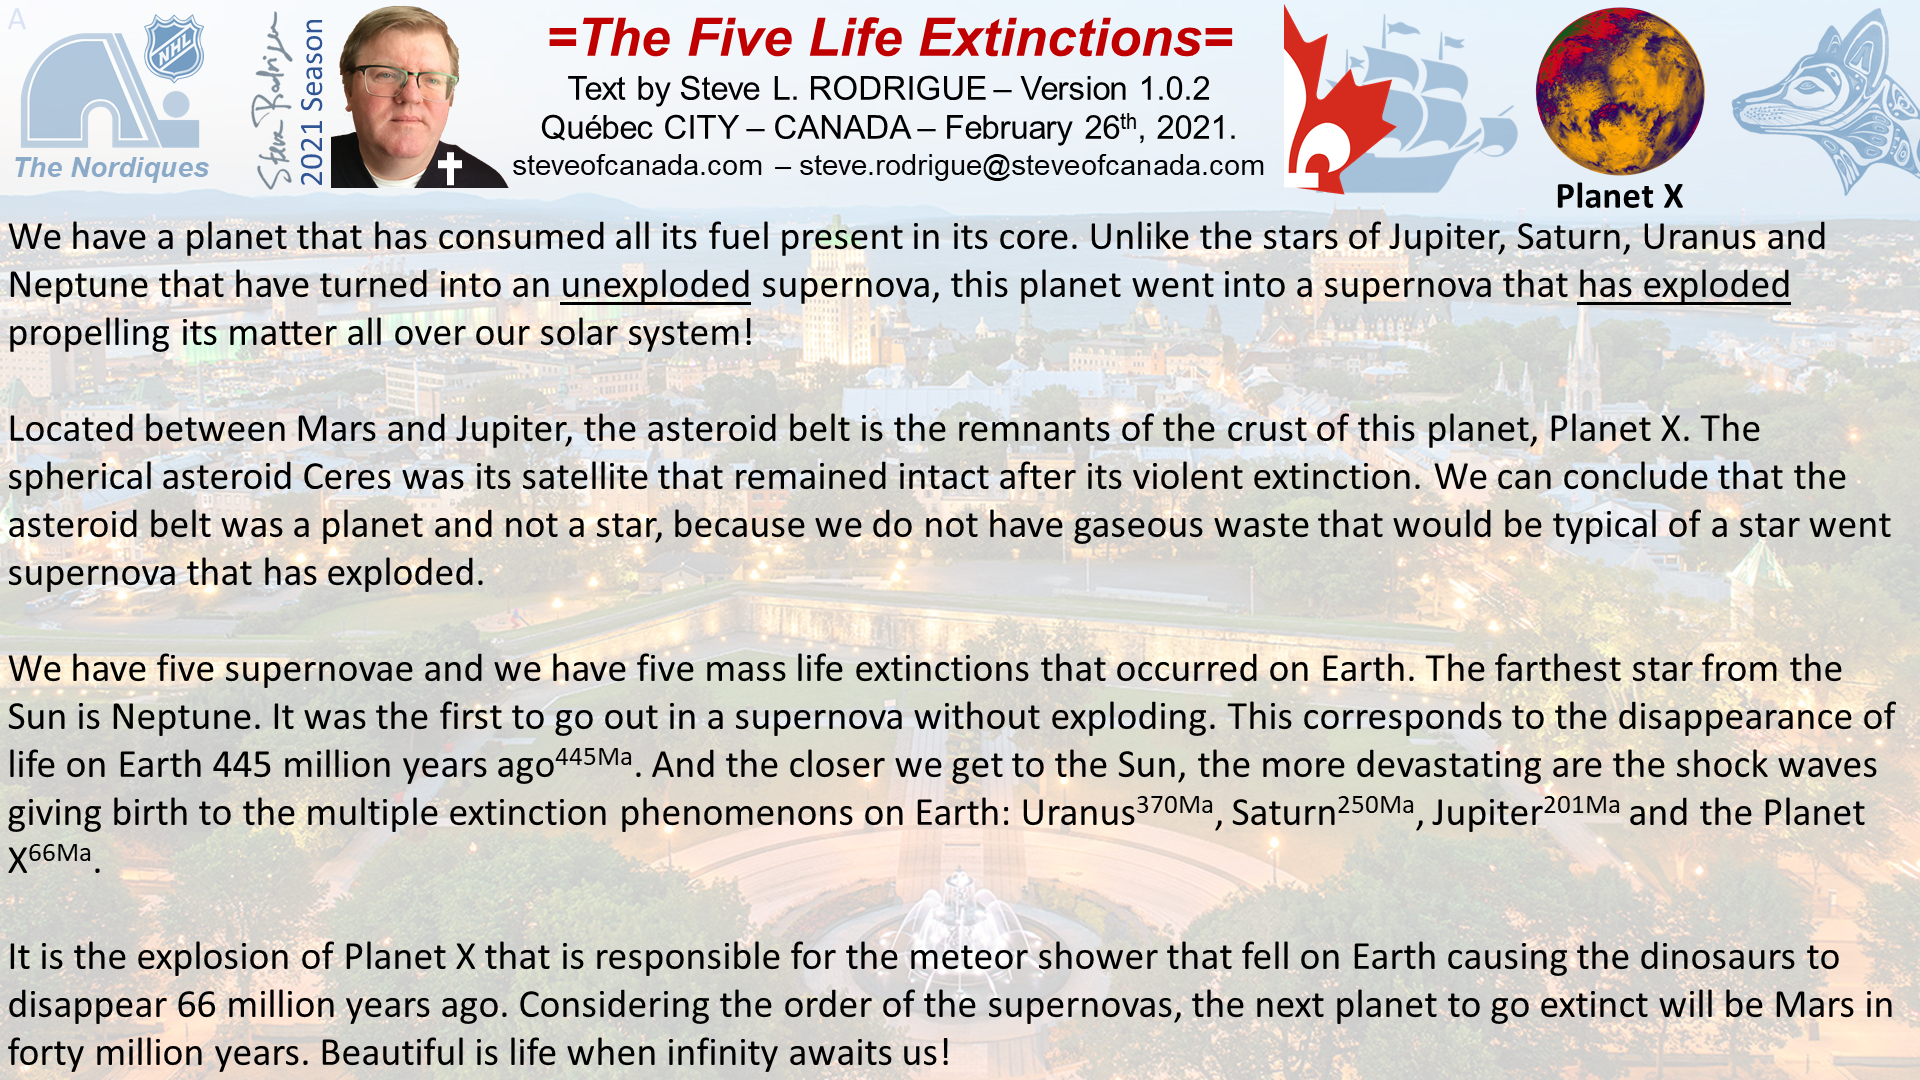 The five life extinctions